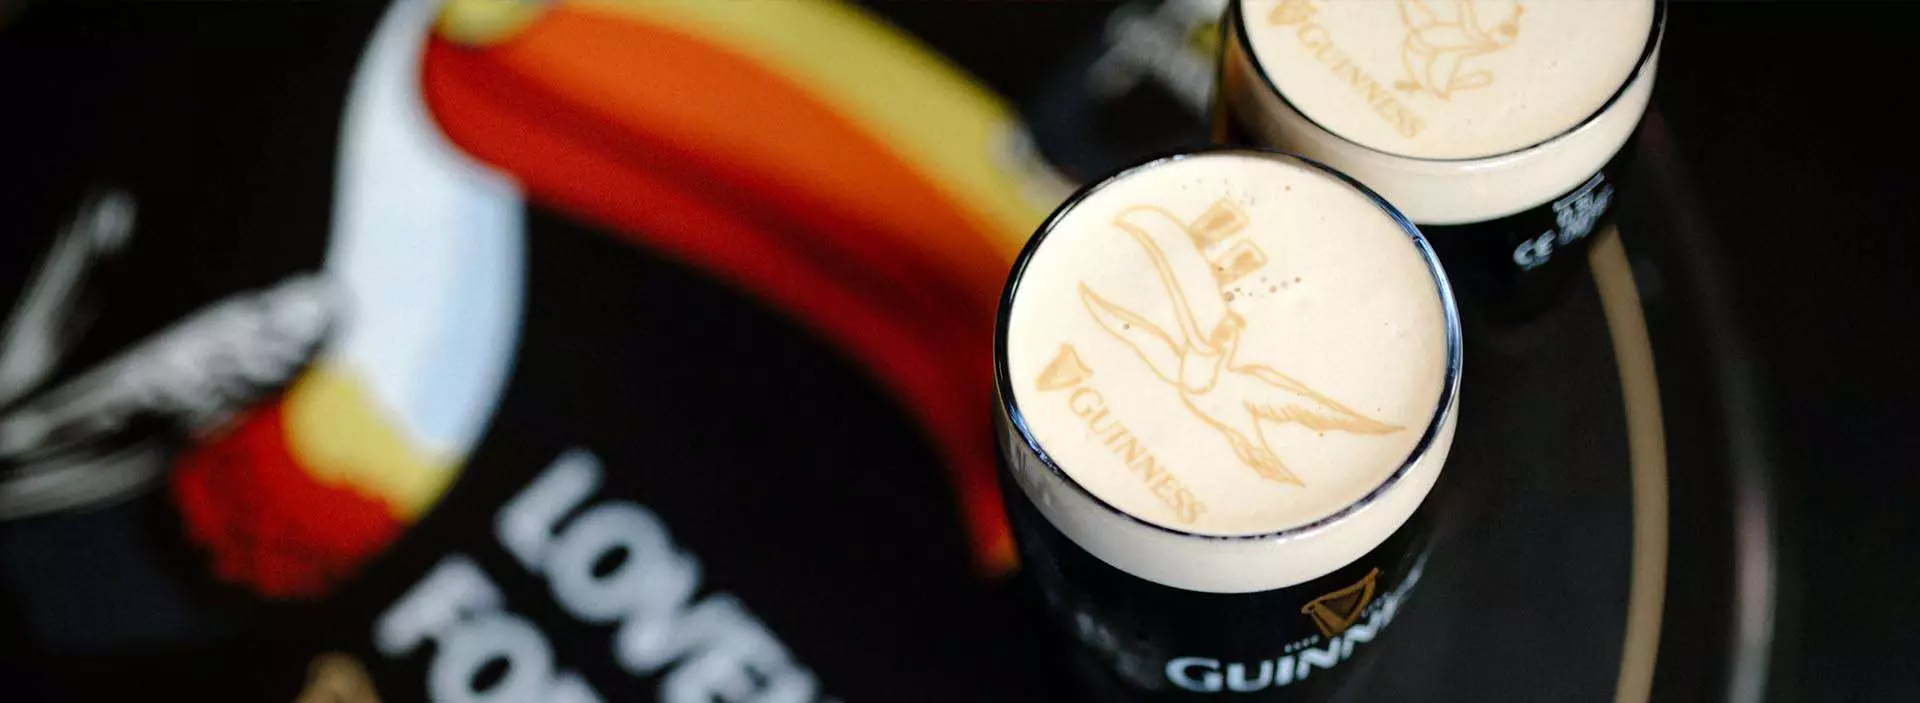 How we got Guinness’s Attention and Boosted Their Sales